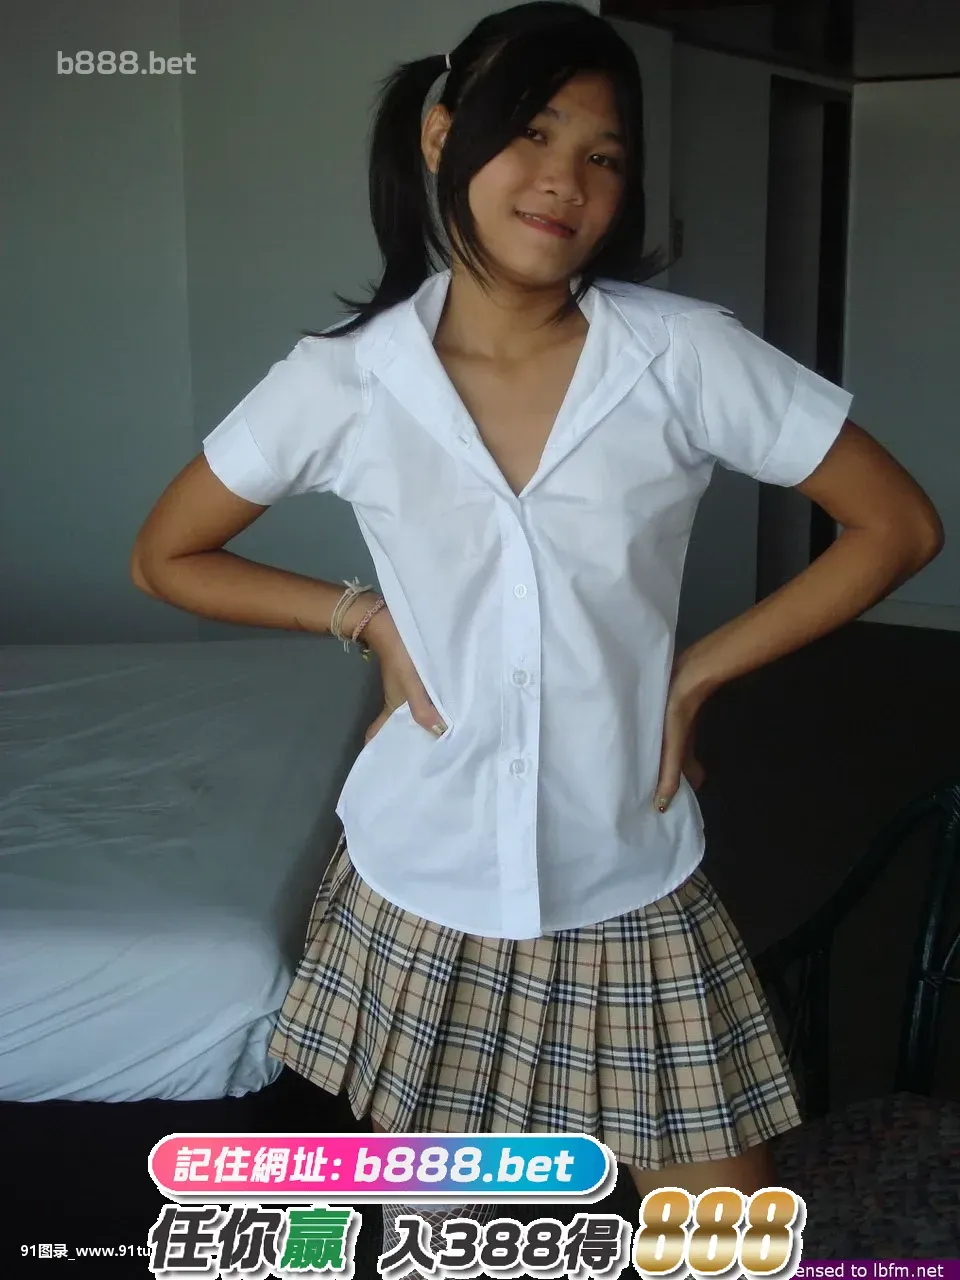 Asian-teen-takes-off-her-schoolgirl-clothes-to-expose-her-hairless-pussy-[11P]Asian,teen,takes,schoolgirl,clothes,expose,hairless,pussy,11P,Asia,Asian